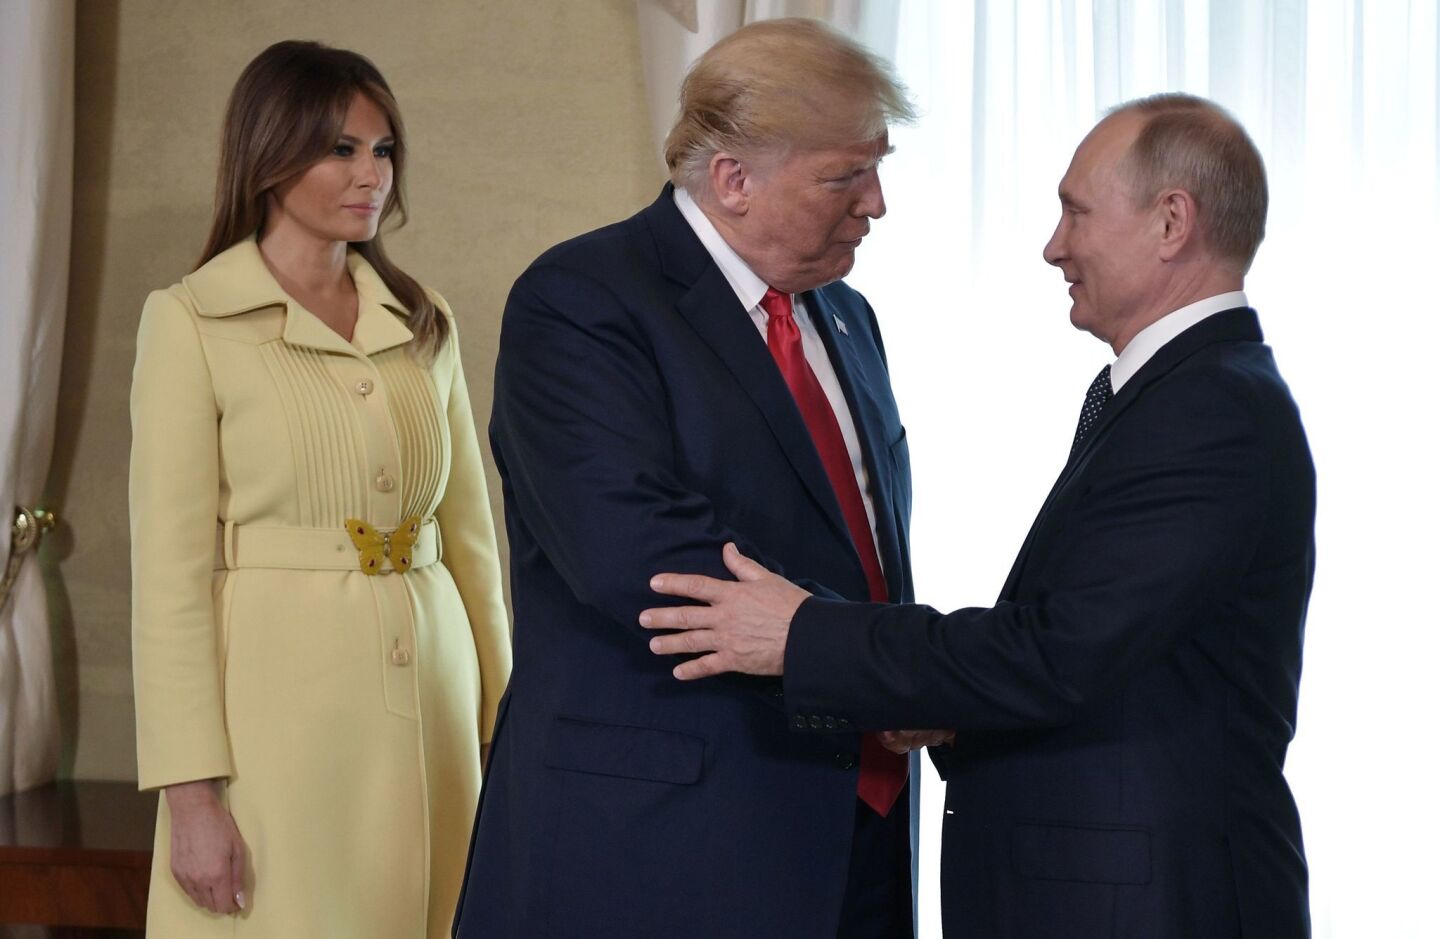 President Trump shakes hands with Russia President Vladimir Putin next to First Lady Melania Trump ahead of a meeting in Helsinki, Finland.